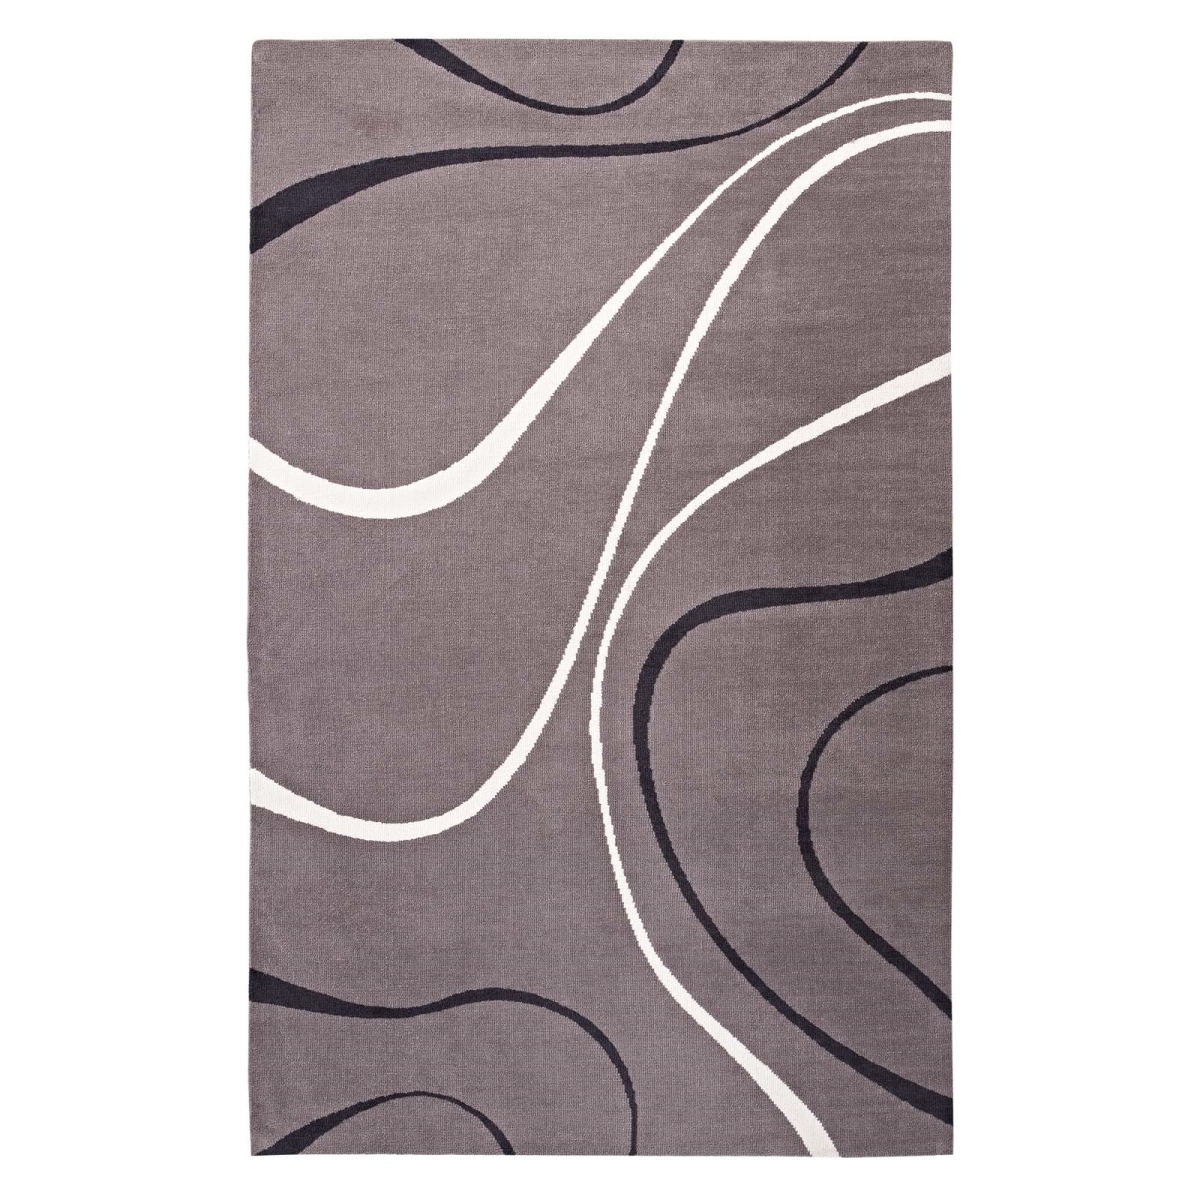 R-1002b-810 8 X 10 Ft. Therese Abstract Swirl Polyester Area Rug - Charcoal, Black & Ivory, 0.5 X 96 X 120 In.